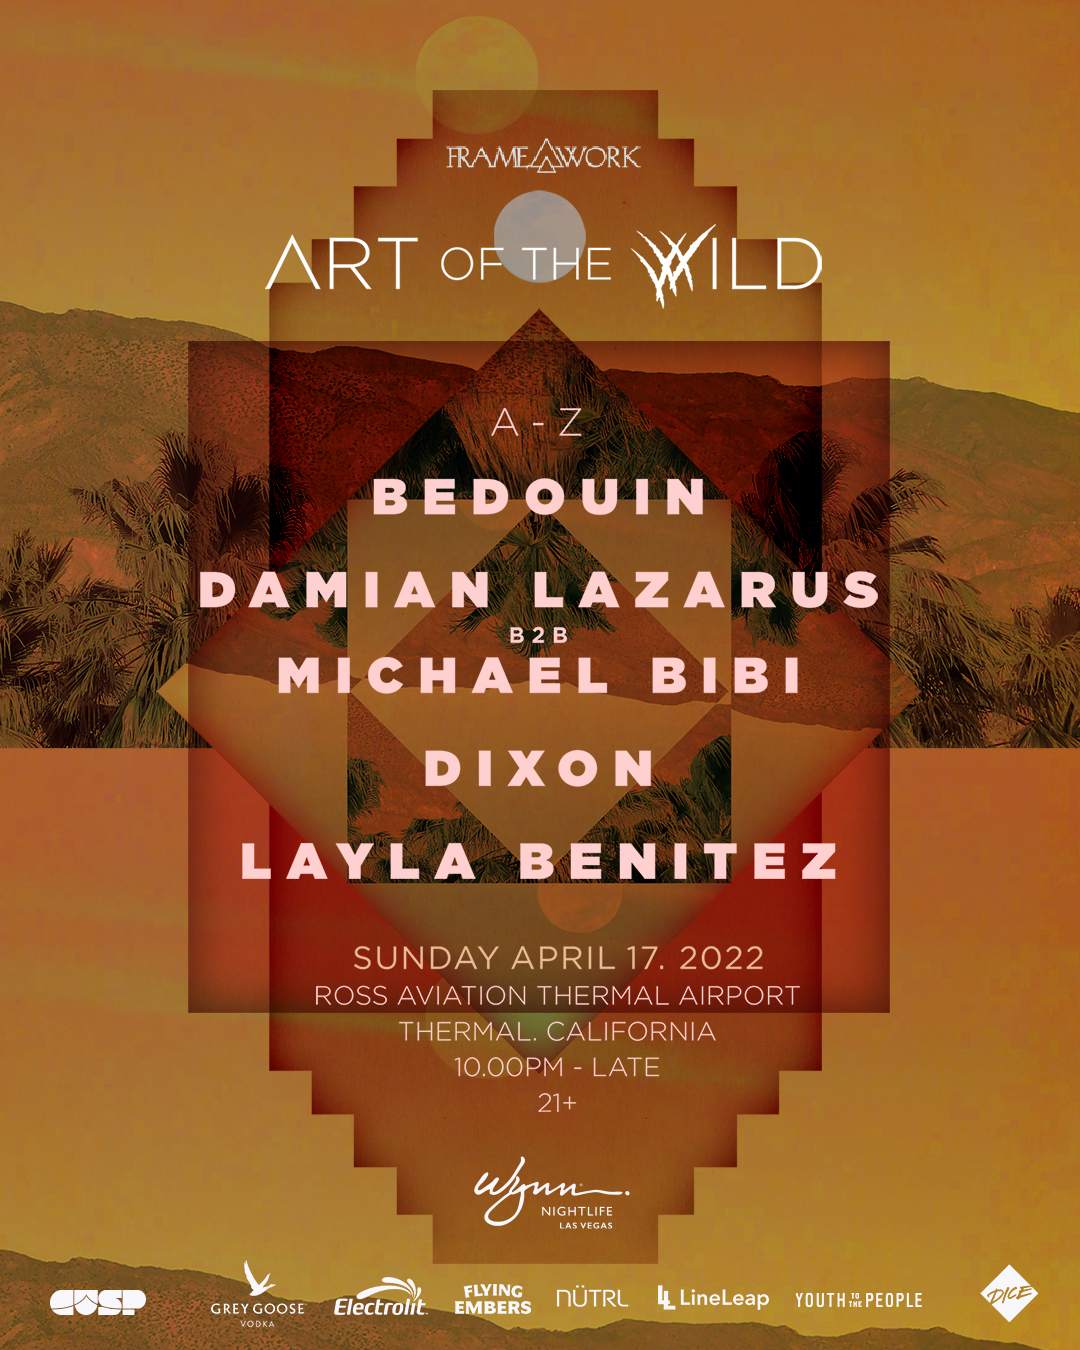 Framework presents Art of the Wild at Ross Aviation Thermal Airport - Página frontal